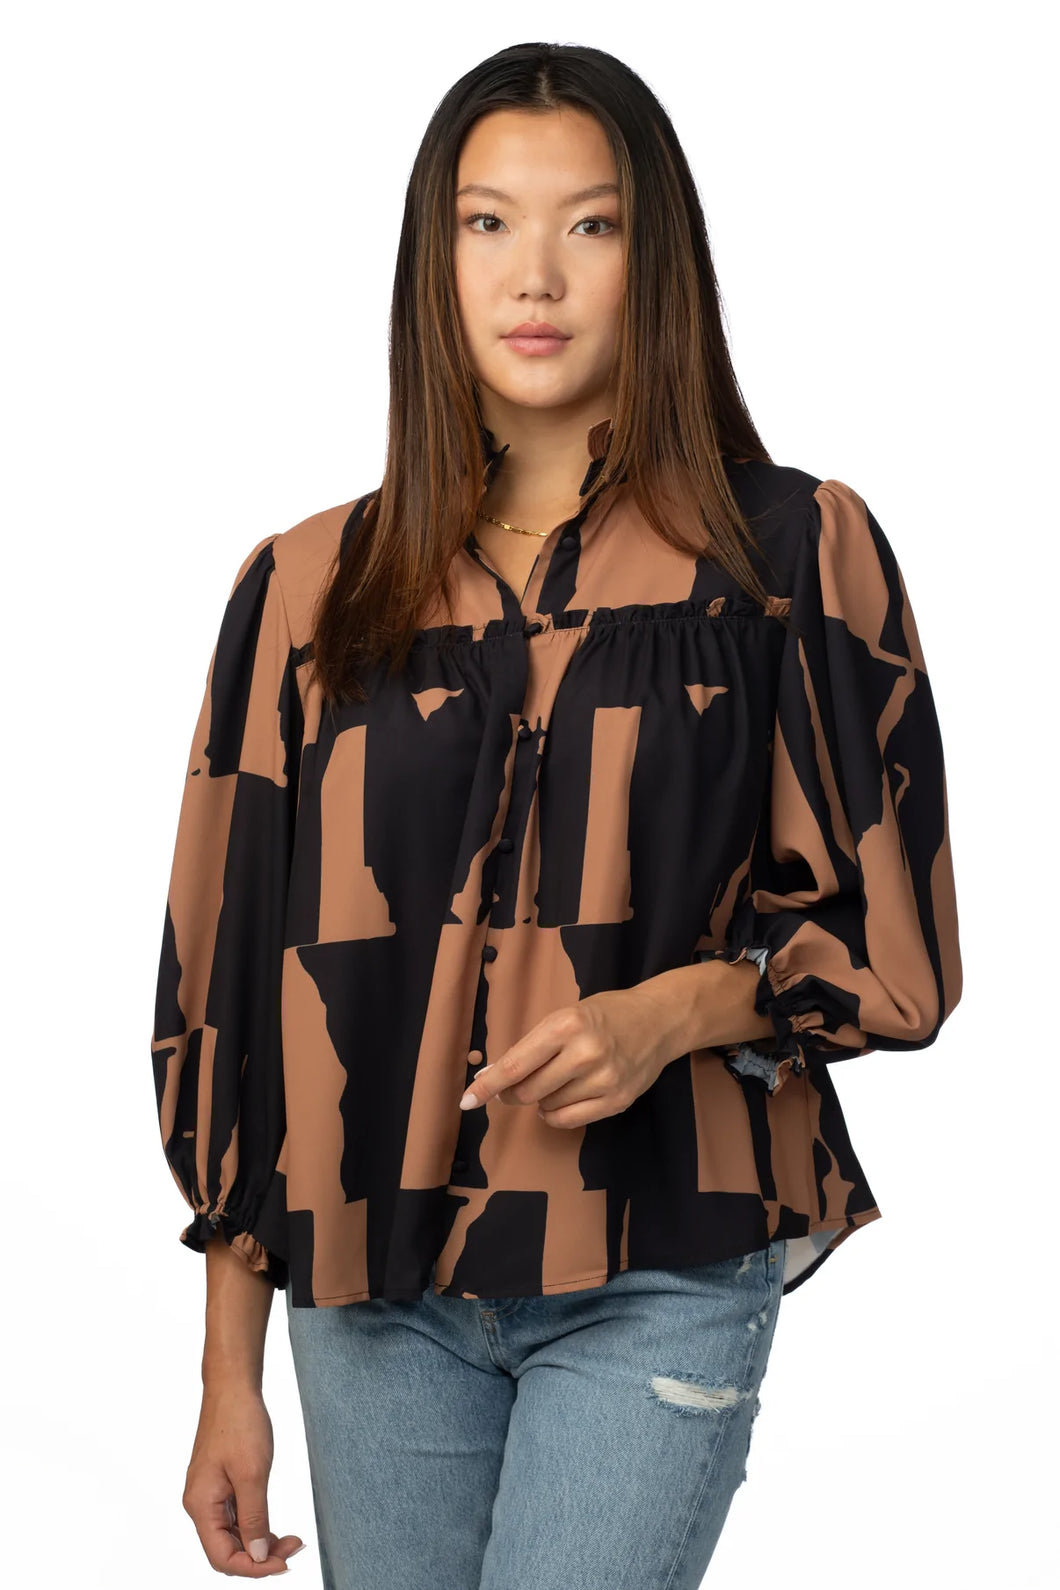 CROSBY by Mollie Burch Worth Blouse - Cotswold